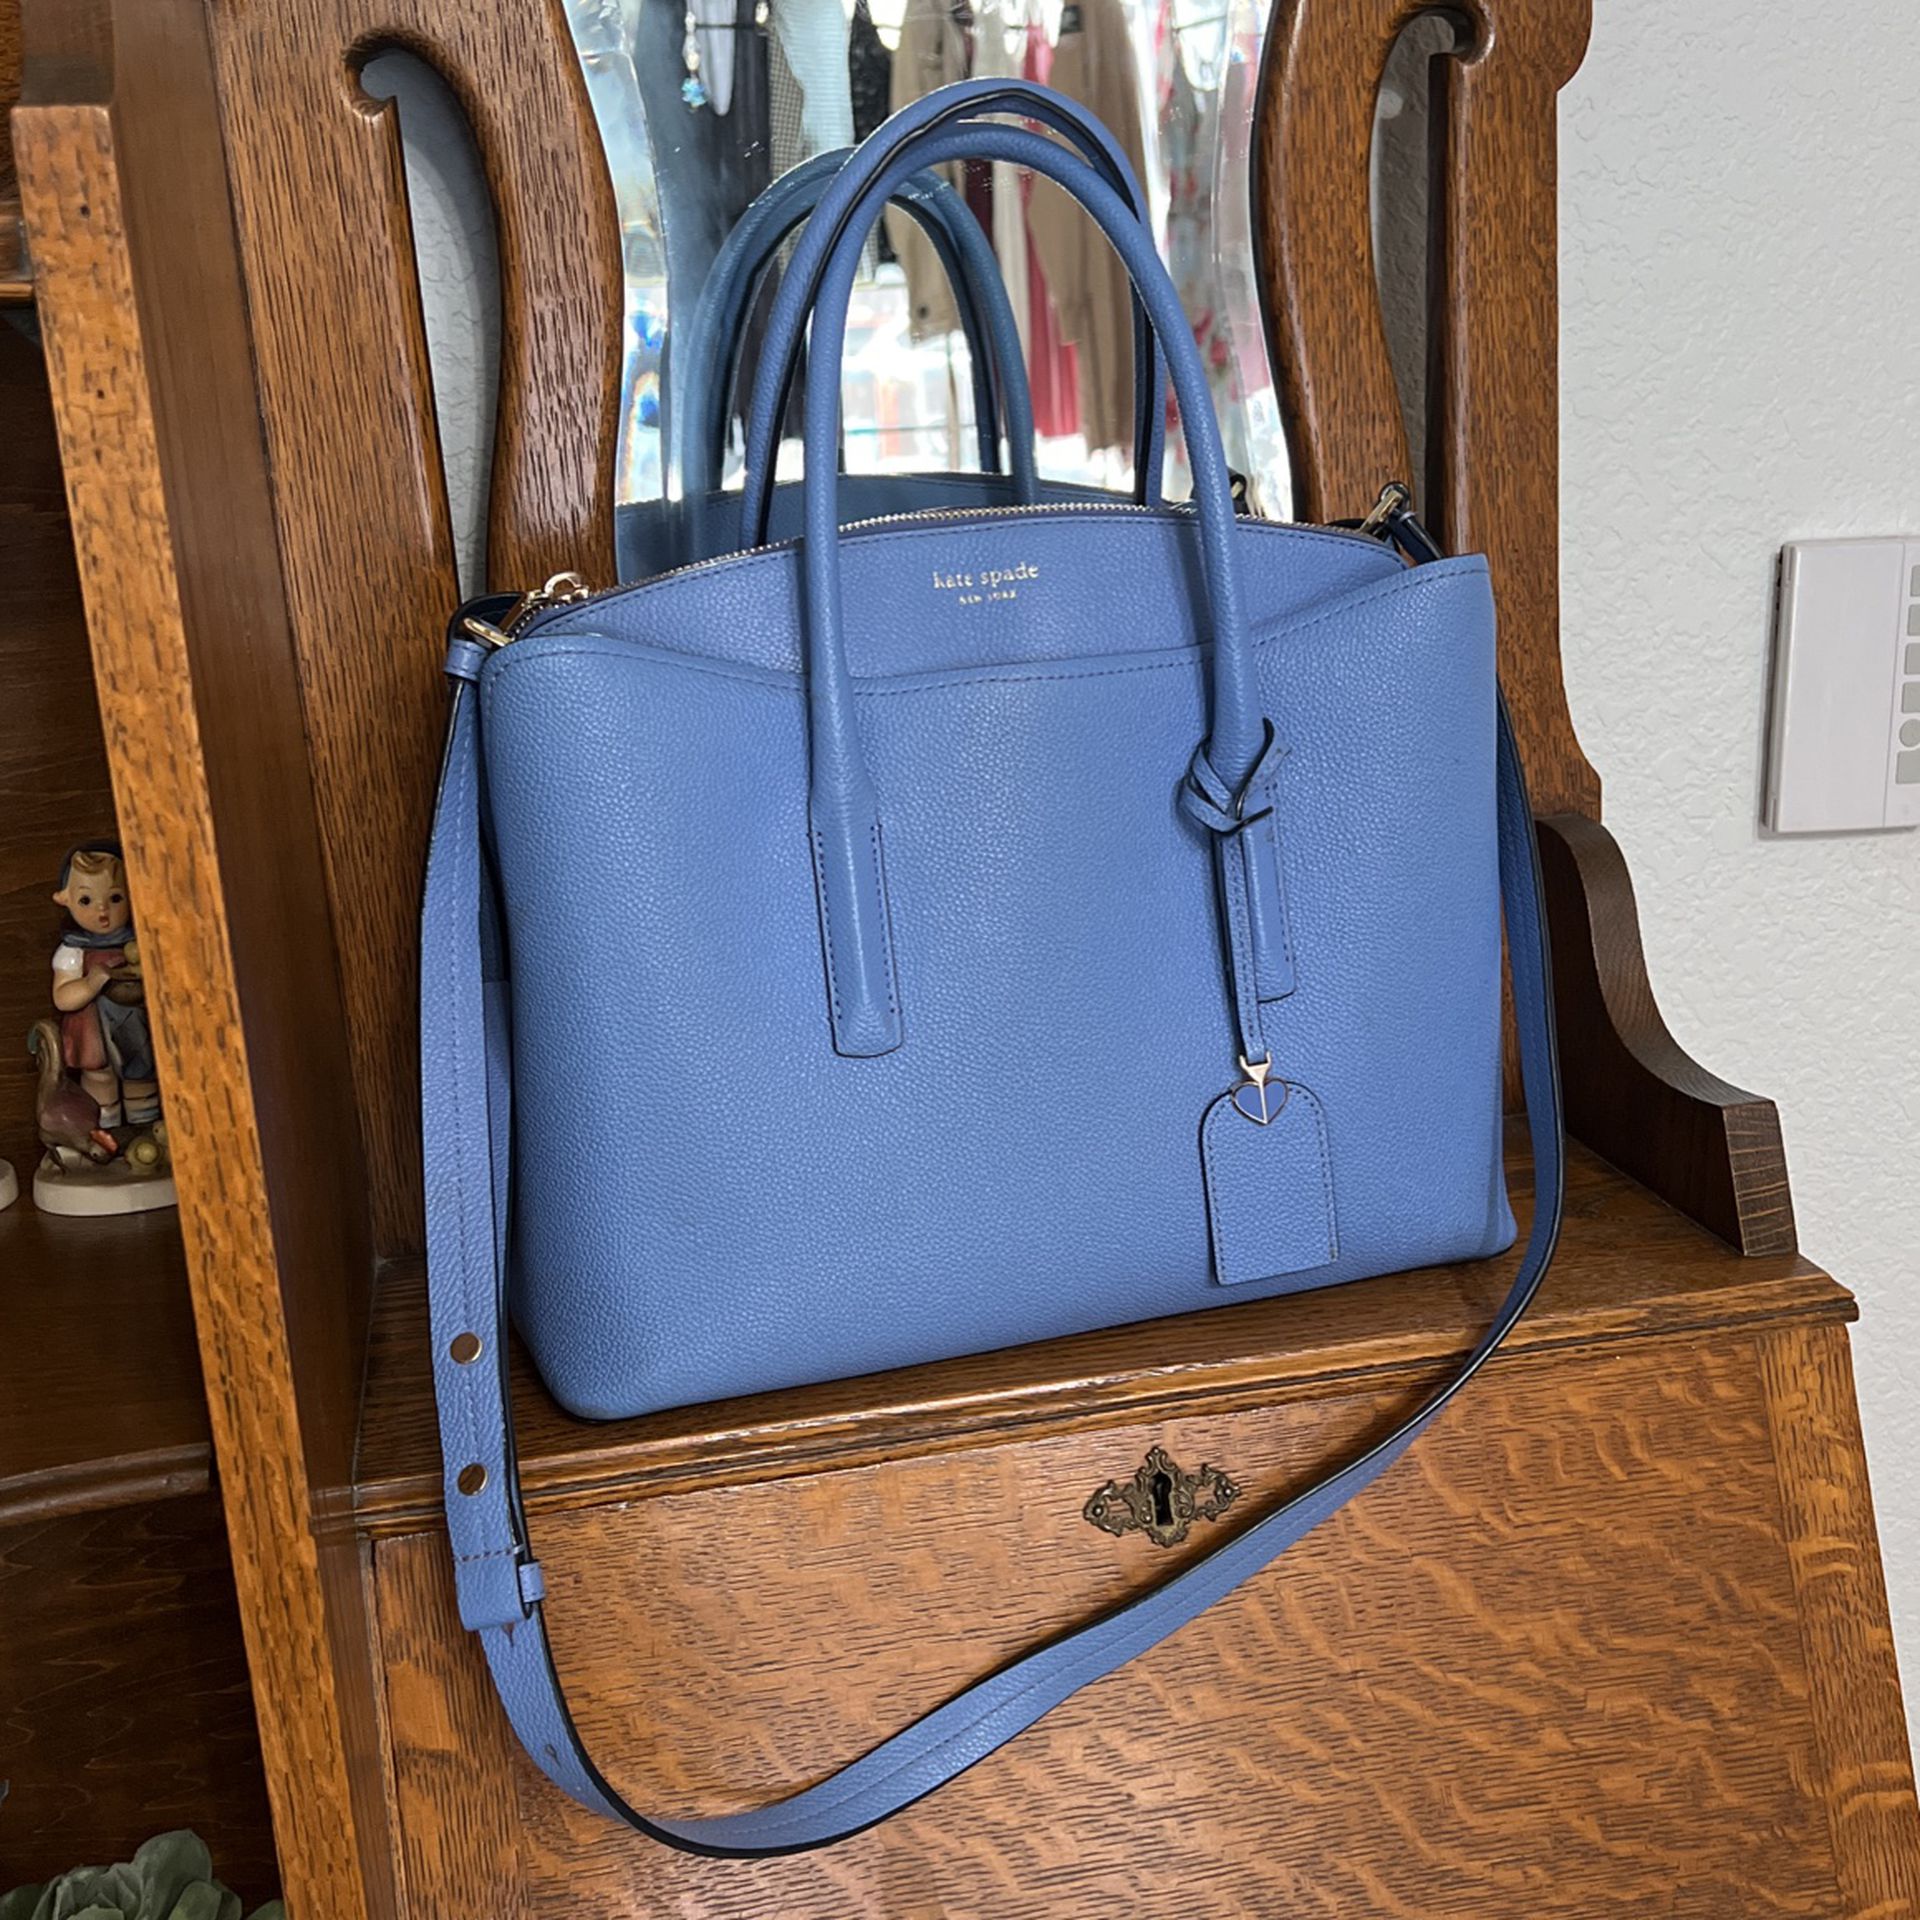 Beautiful blue, Kate Spade purse with handles and shoulder strap